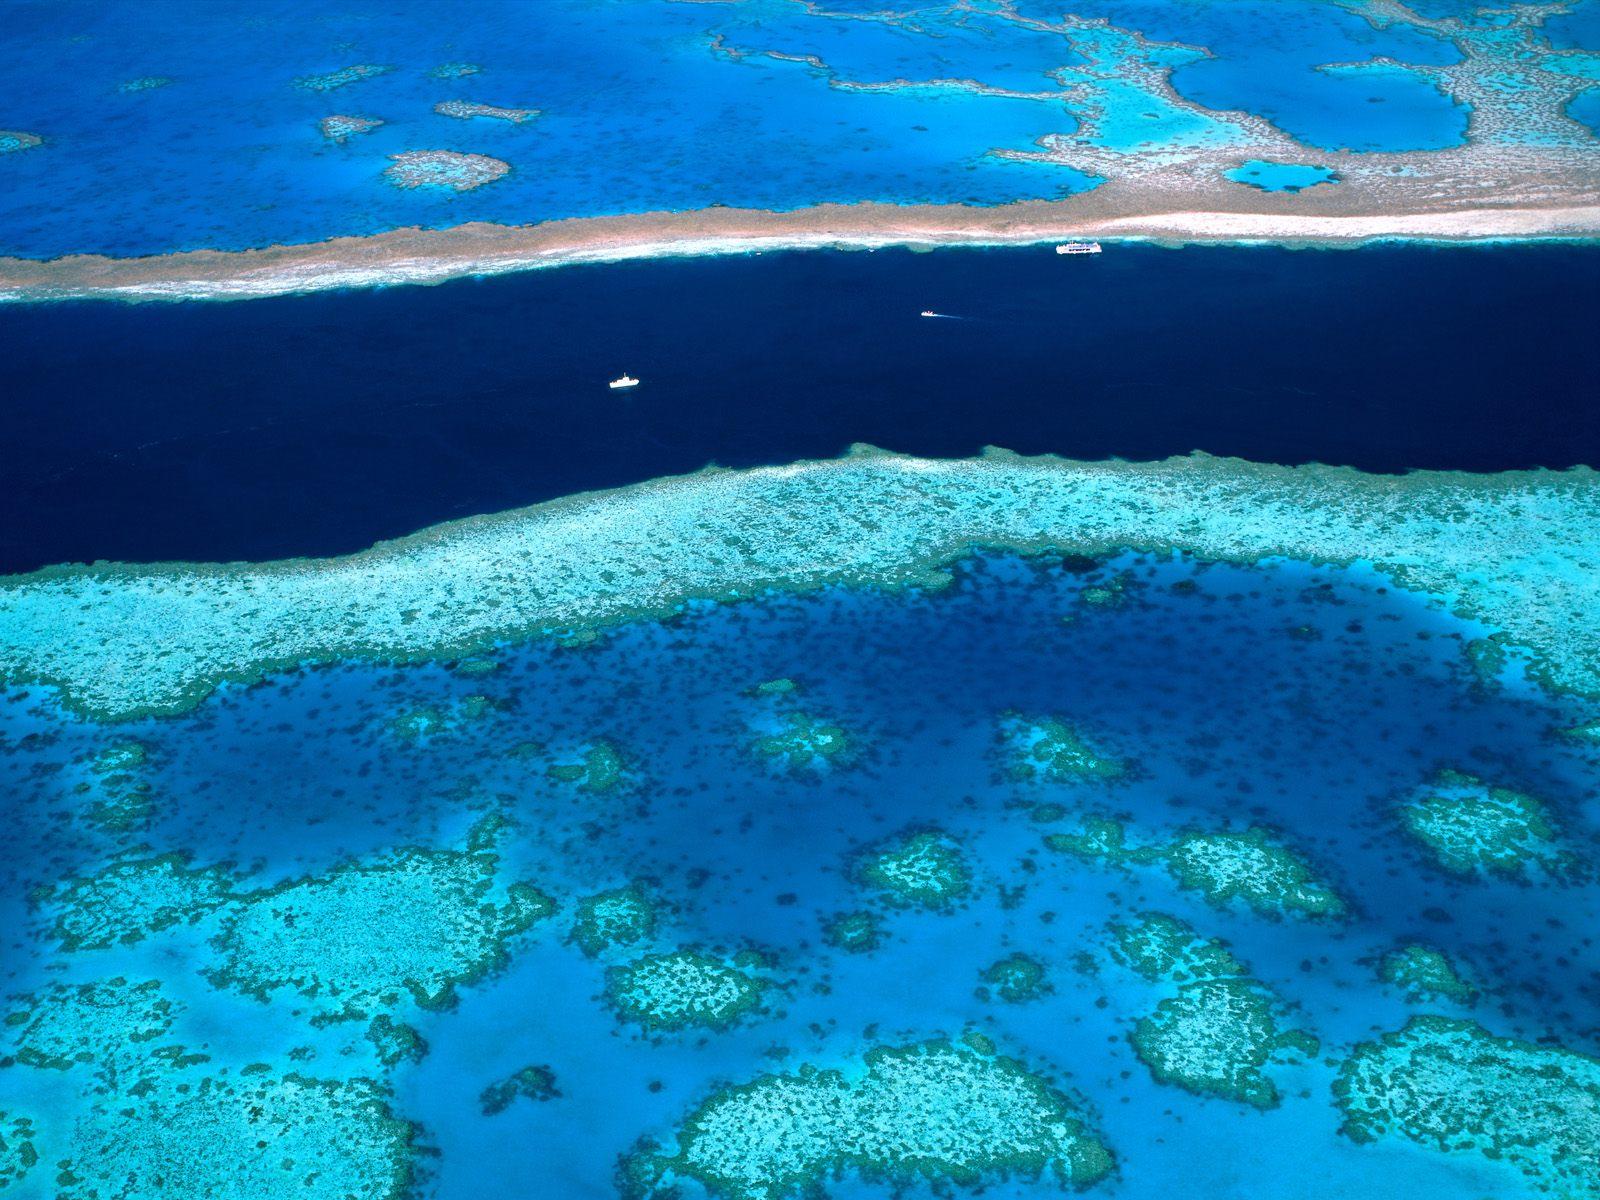 Dredging the Great Barrier Reef. Abyss